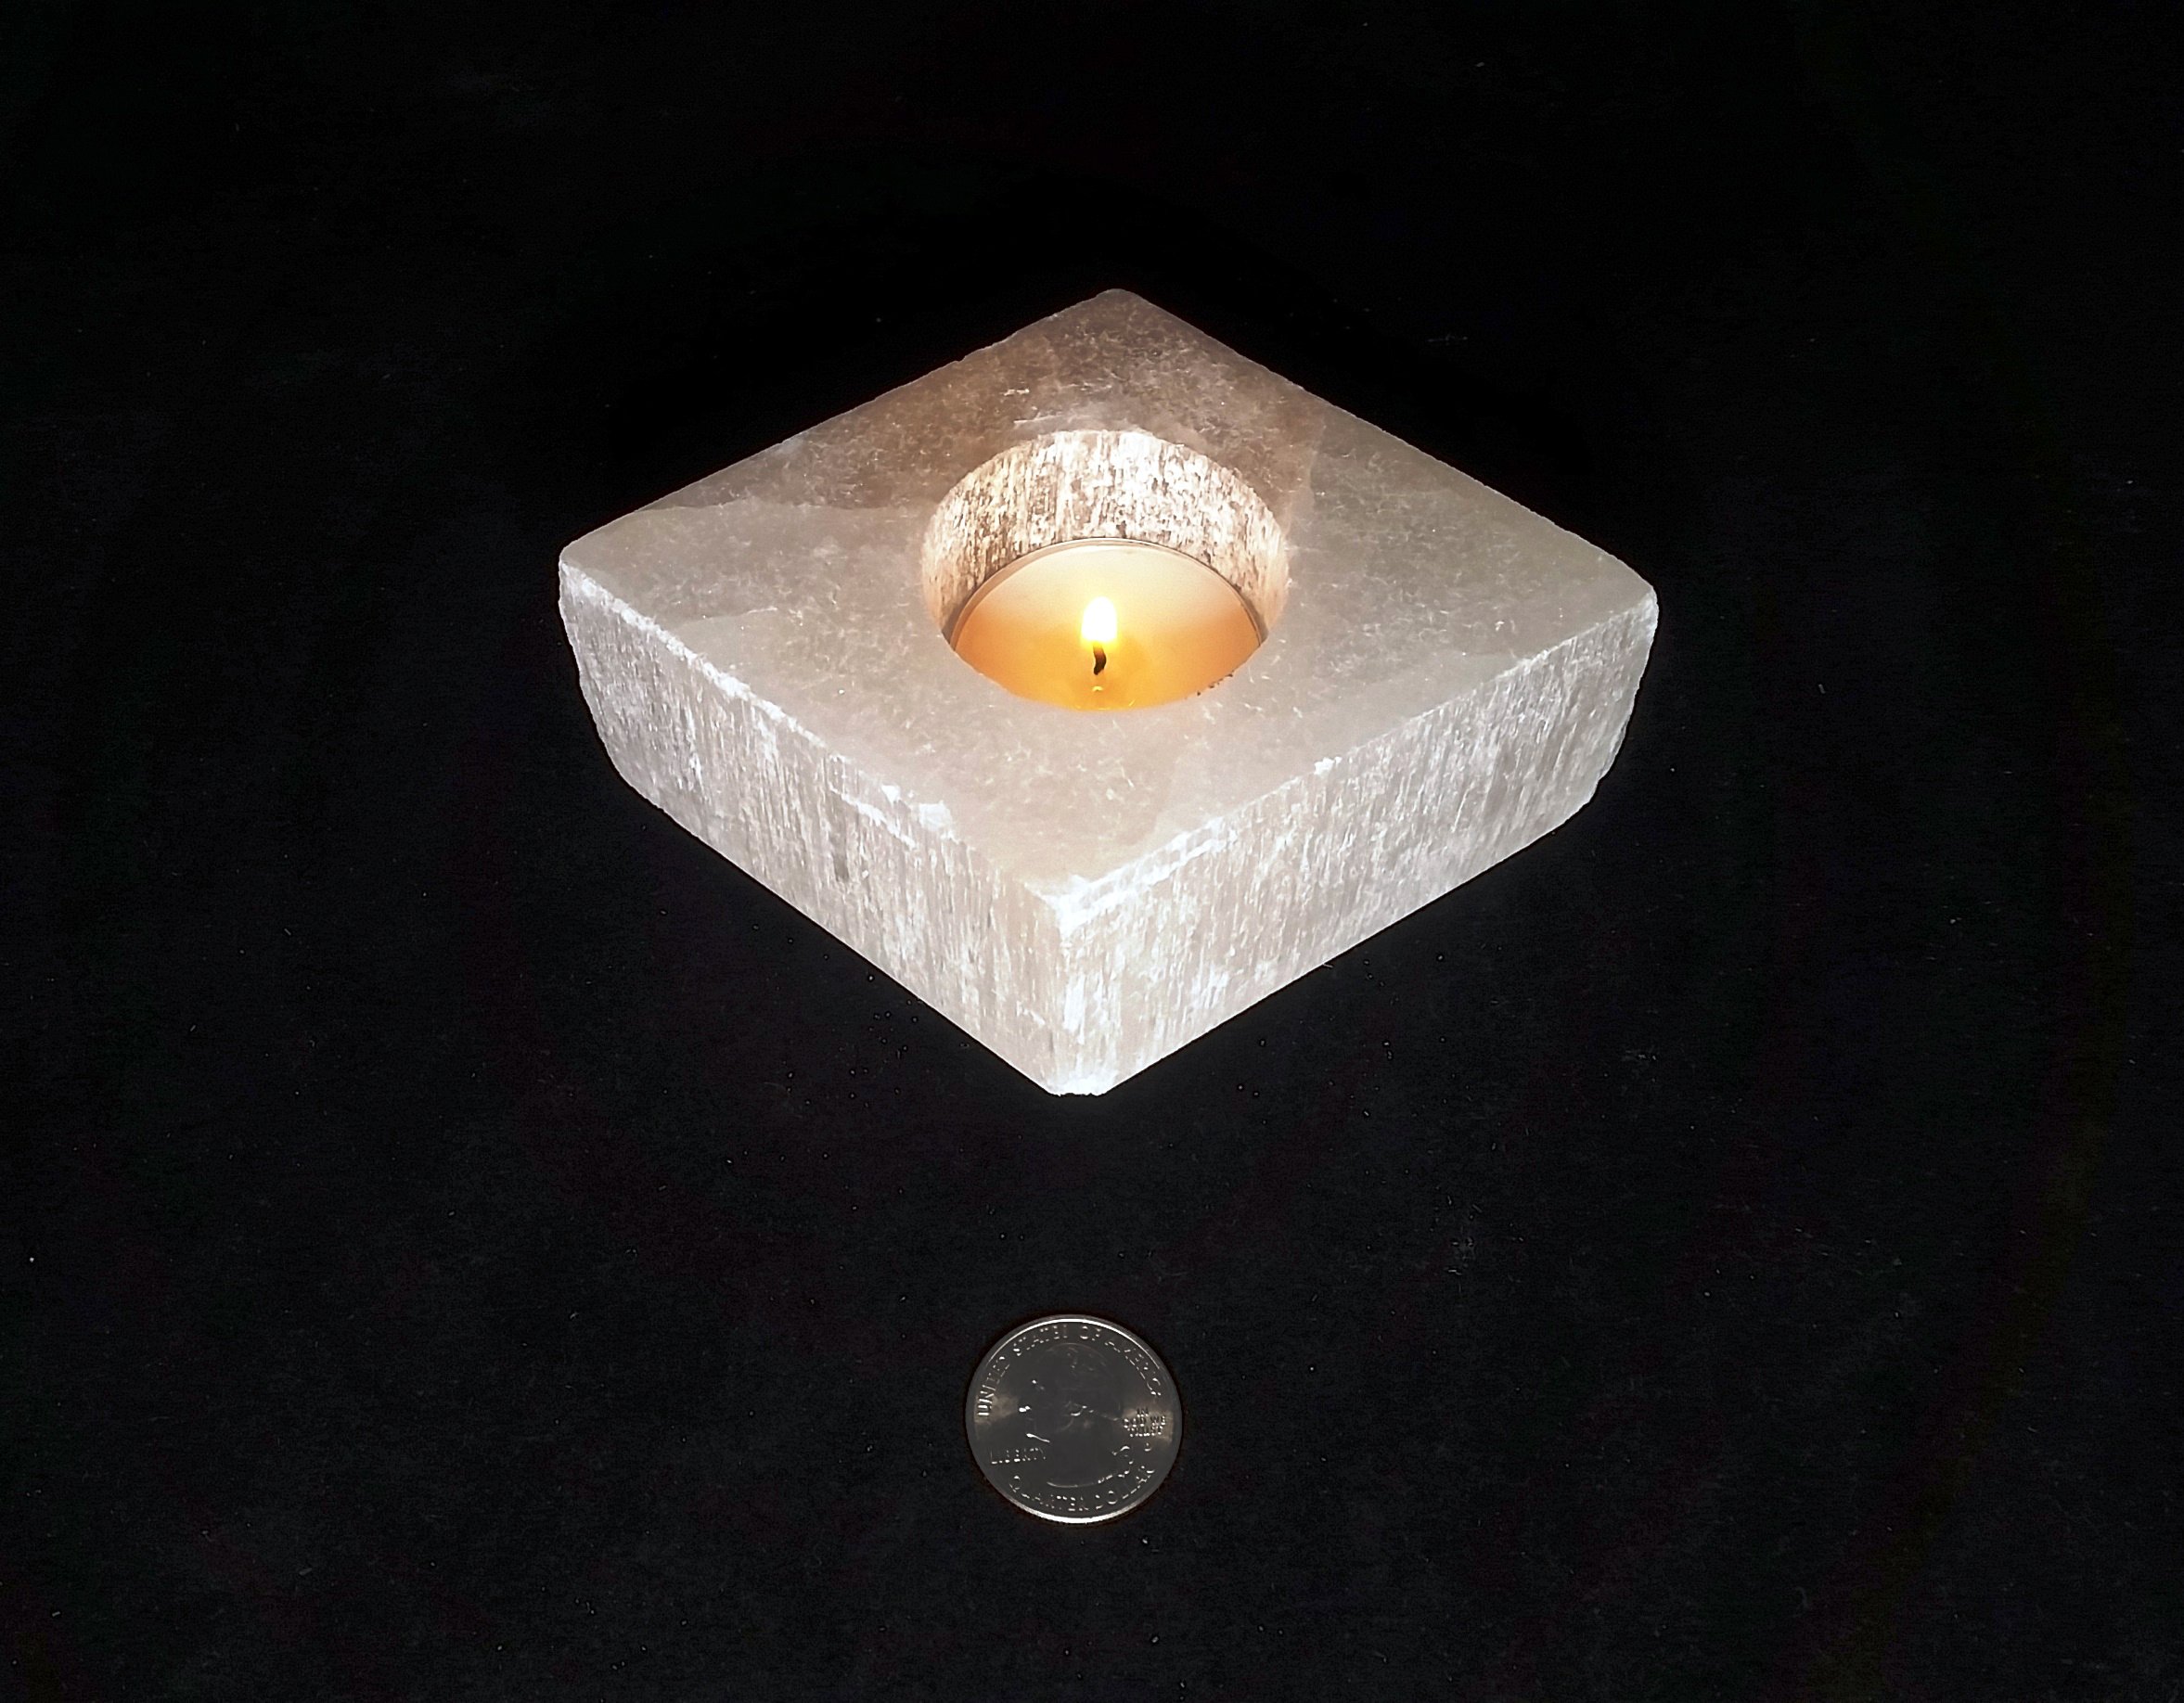 An amazing stone of cleansing and clearing, Selenite naturally dispels negative energy, removes energy blocks, and charges and amplifies other stones. Never needing clearing of its own, it is a must-have in your home.   These glowing and gorgeous Selenite candleholders will supercharge and cleanse you and your home with color, light, and high vibrations. (Add a rainbow light-changing box to truly enhance the beauty of your Selenite!)